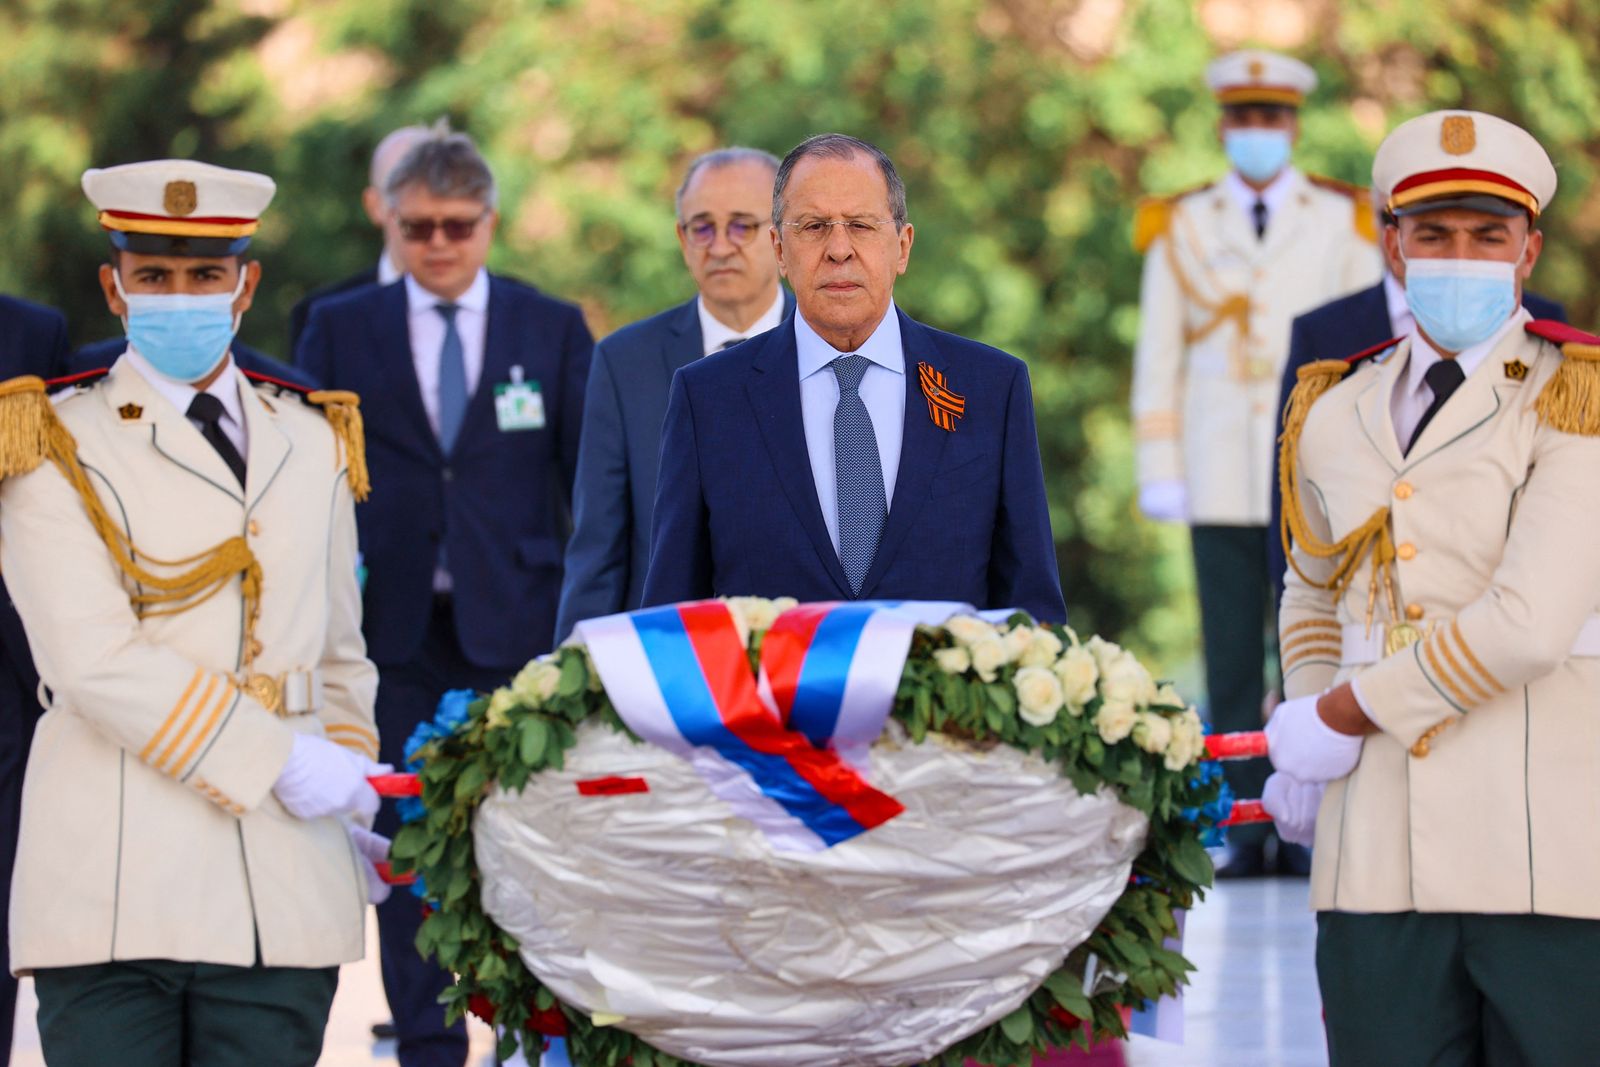 A handout picture taken and released by the Russian Foreign Ministry press service shows Russian Foreign Minister Sergei Lavrov (C) attends a flower-laying ceremony during his visit in Algiers on May 10, 2022. (Photo by Handout / various sources / AFP) / RESTRICTED TO EDITORIAL USE - MANDATORY CREDIT 